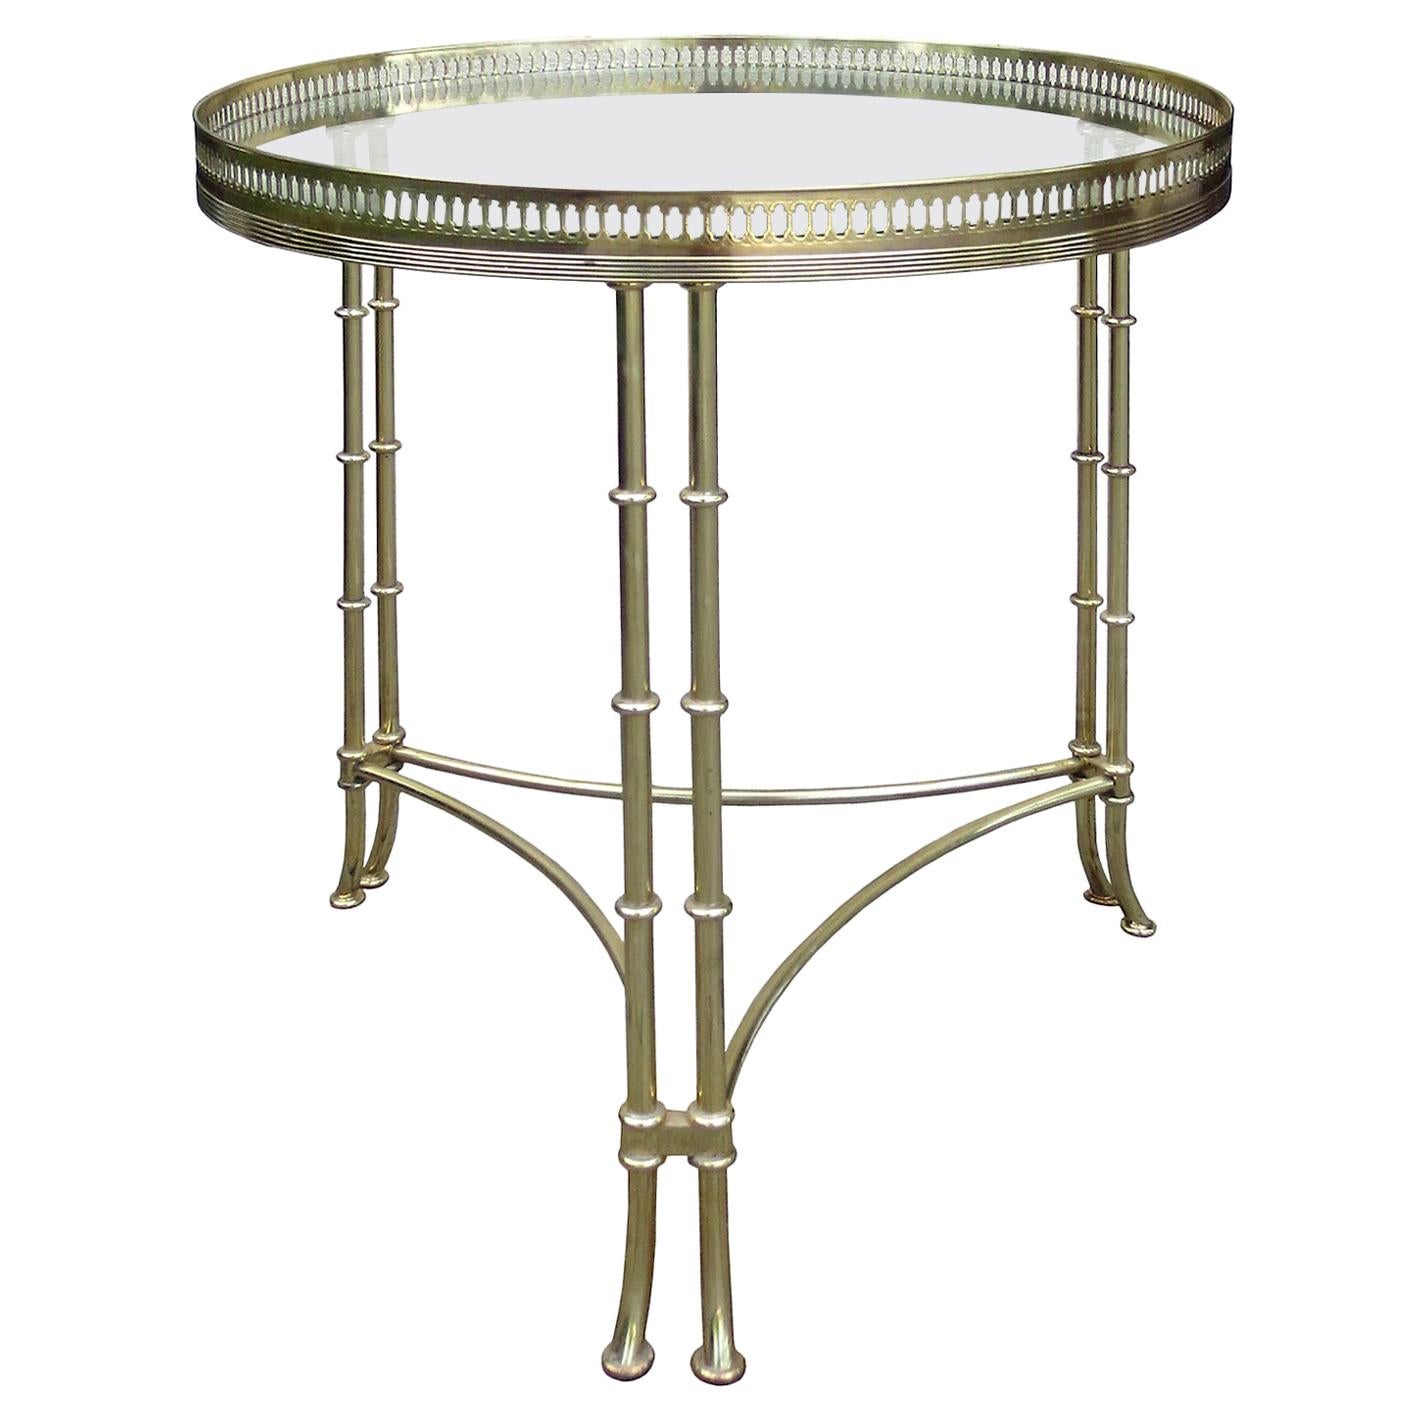 Maison Baguès, Attributed Mid-20th Century Brass & Glass Side Table with Gallery